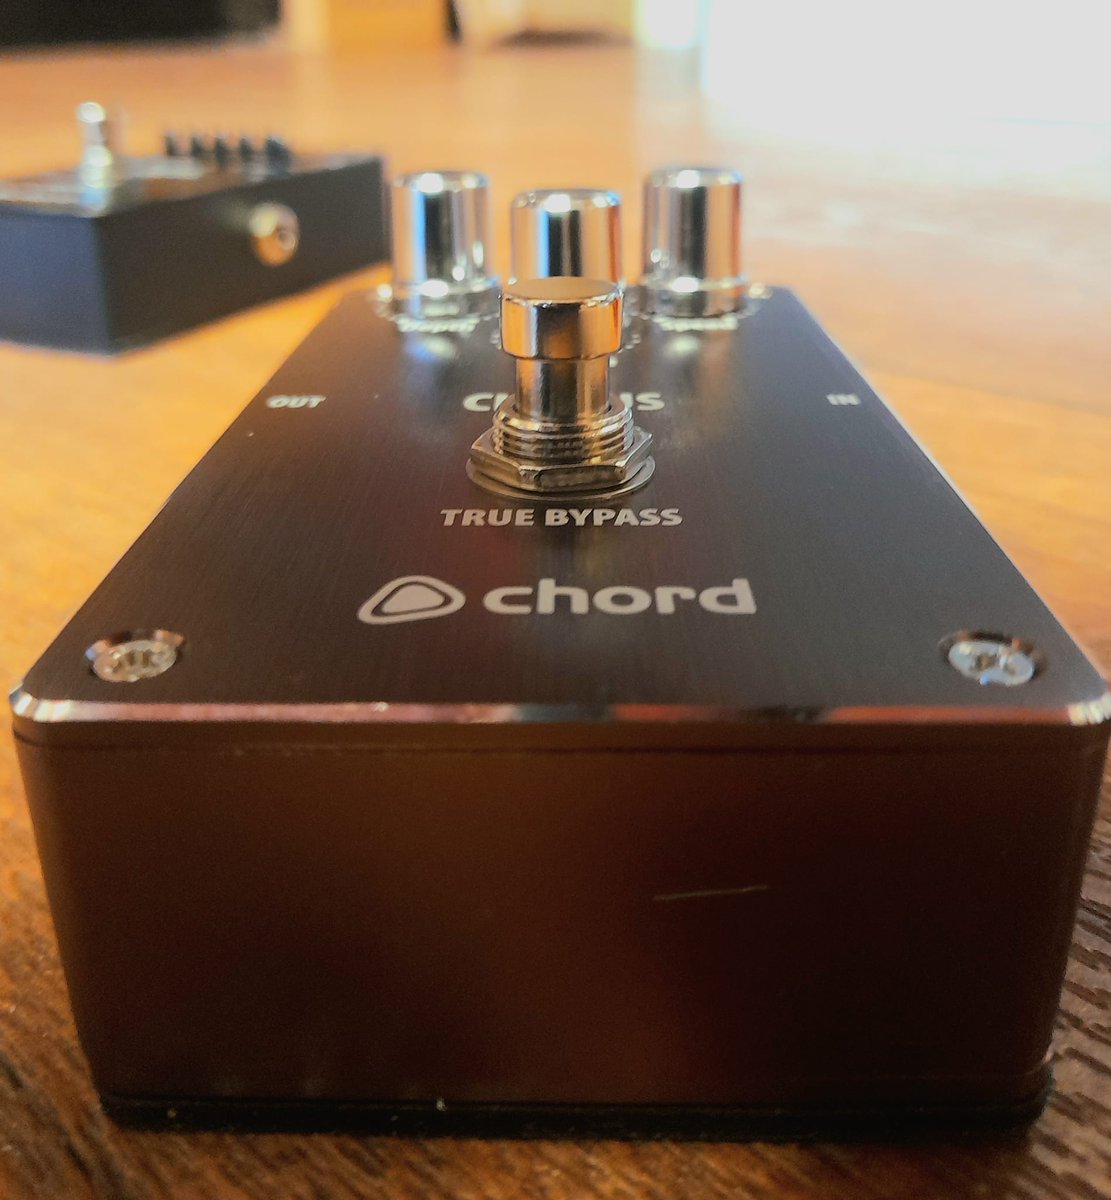 This great new range of Chord effects pedals from @AVSLGroupLtd has just landed in stock. #guitarpedals #guitareffects #effectspedals #guitarshop #musicshop #music #bolton #est1832 #distortionpedal #delaypedal #choruspedal #equaliserpedal